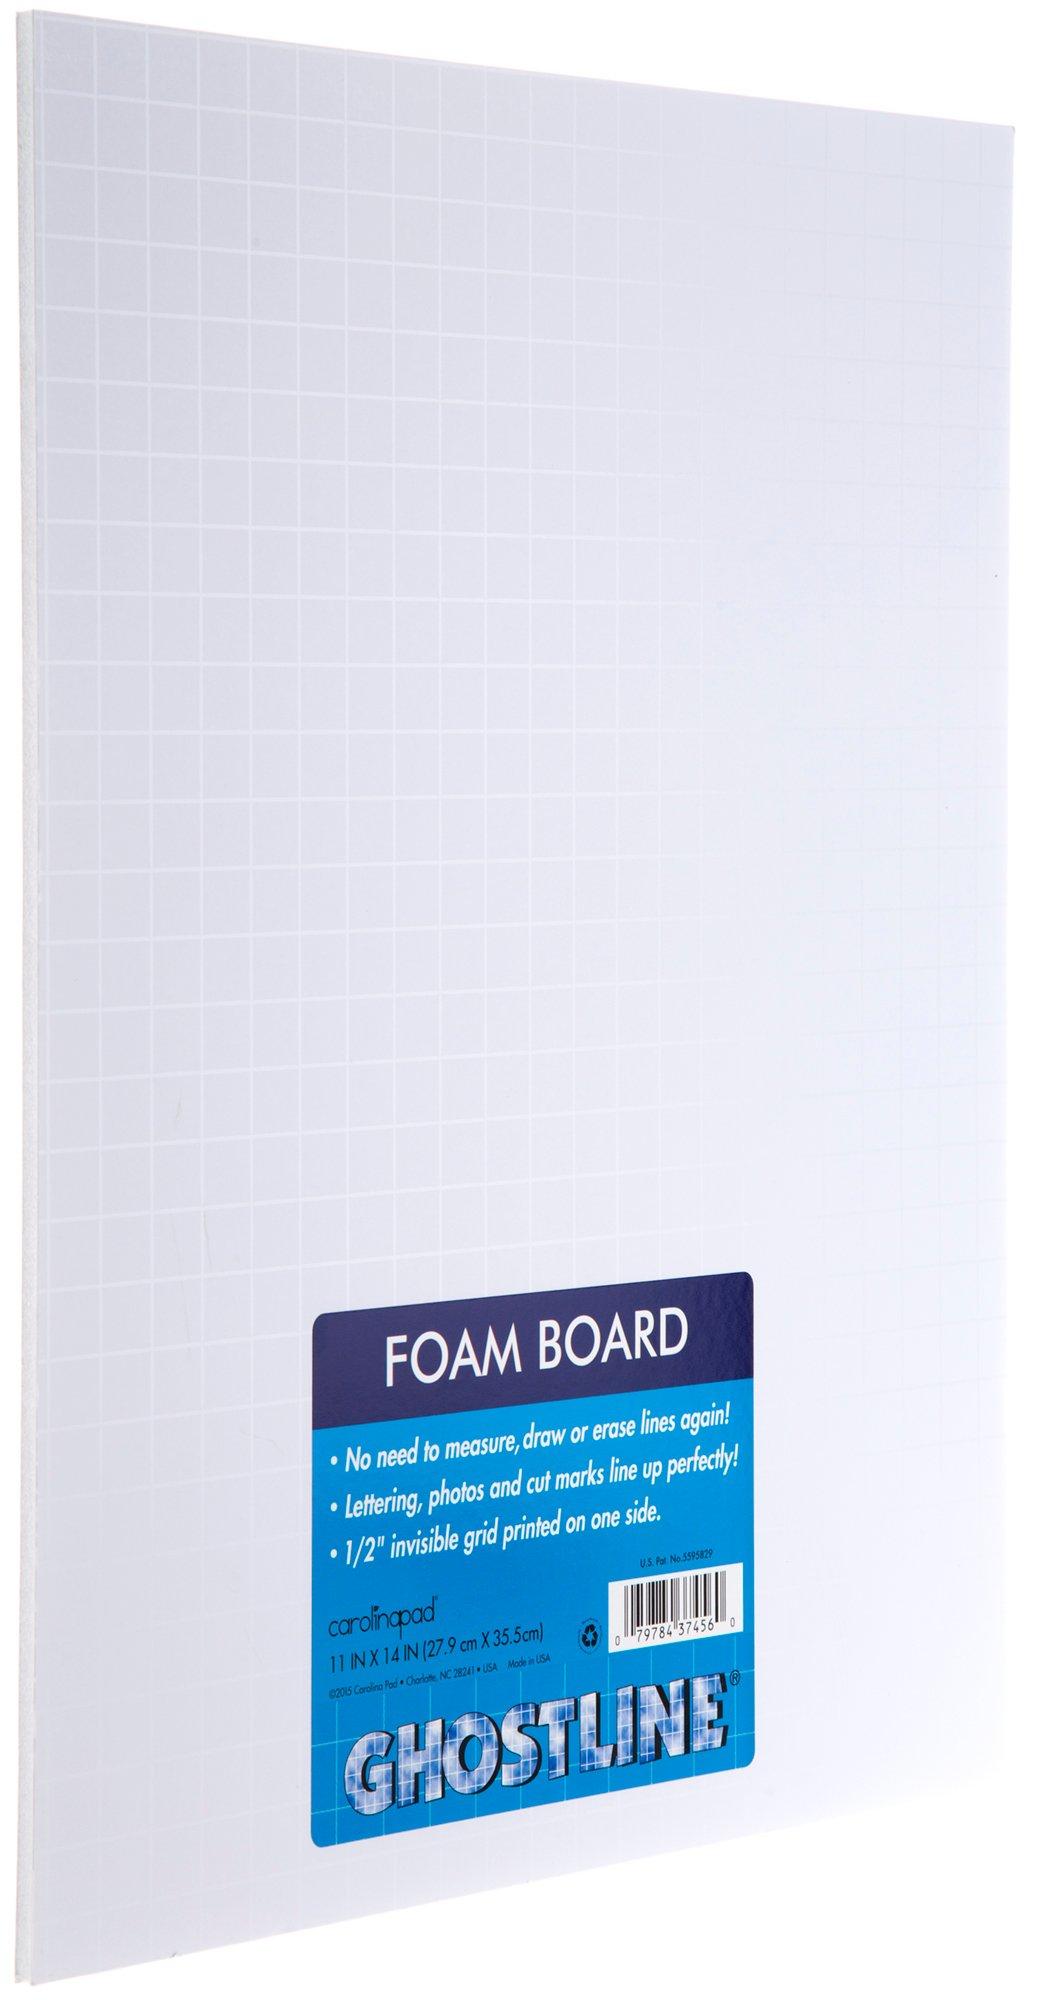 Top Flight White 11x14 Posterboard, 5 Count - Pick 'n Save